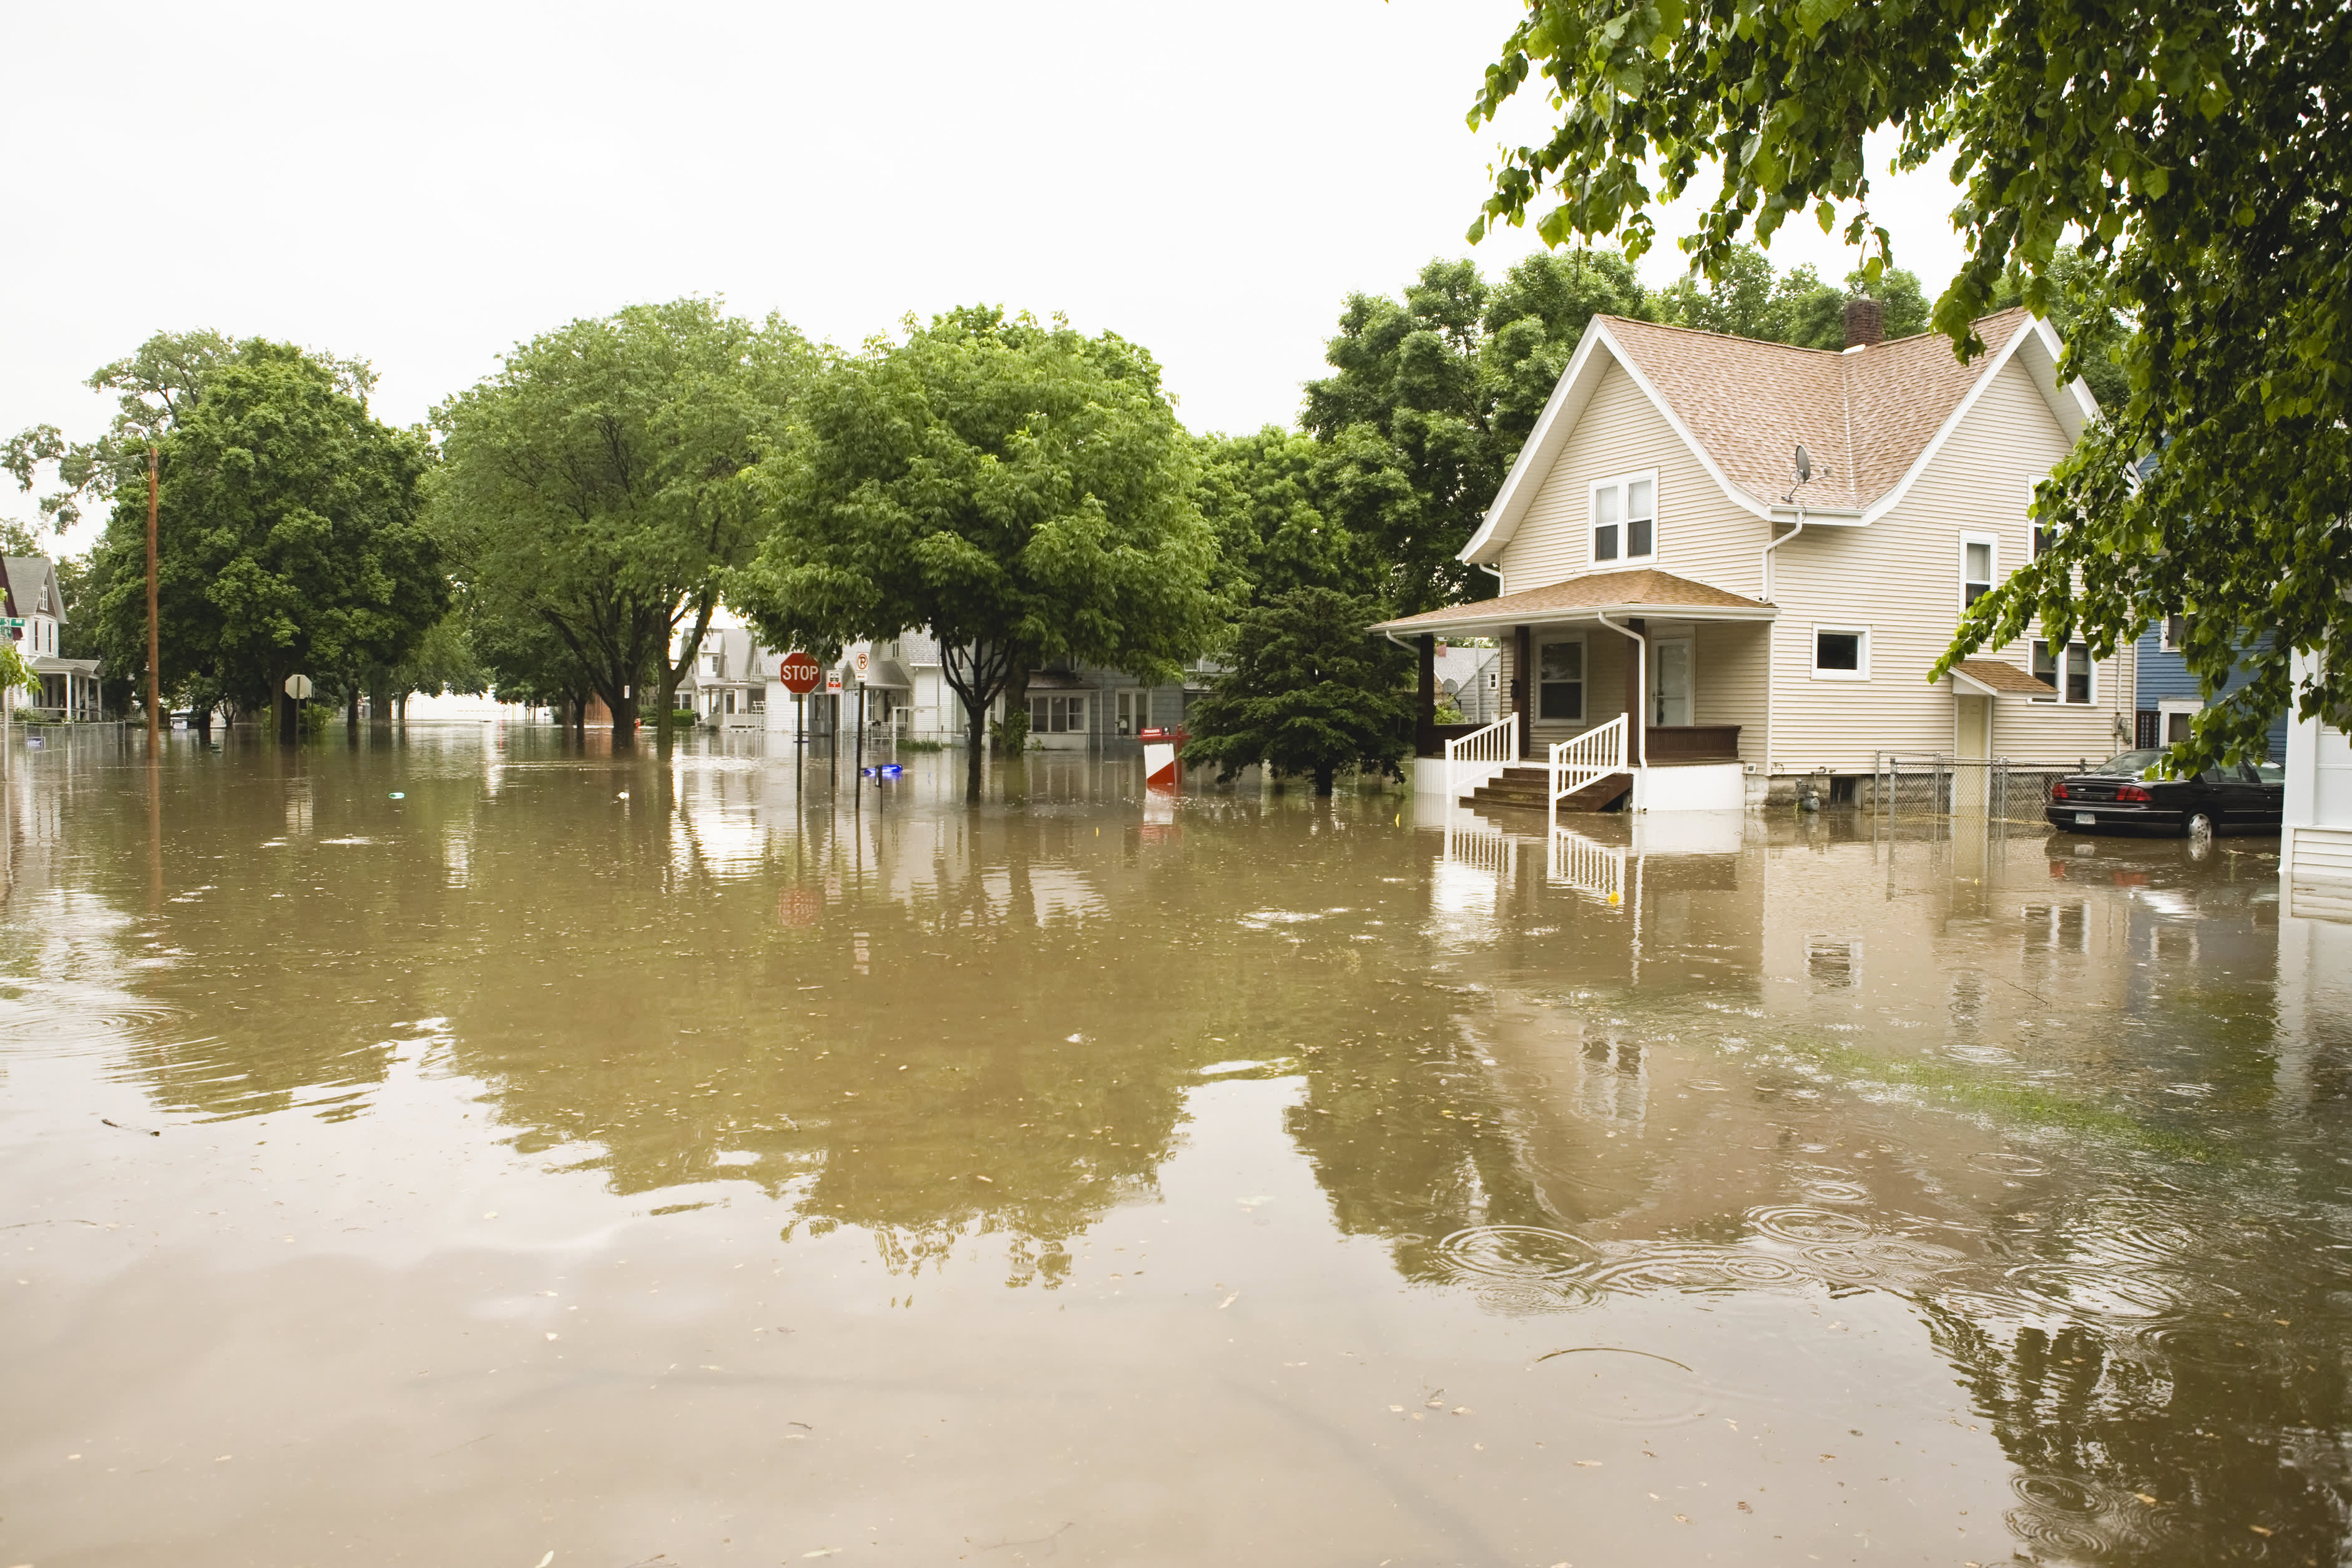 How to Financially Prepare for a Natural Disaster